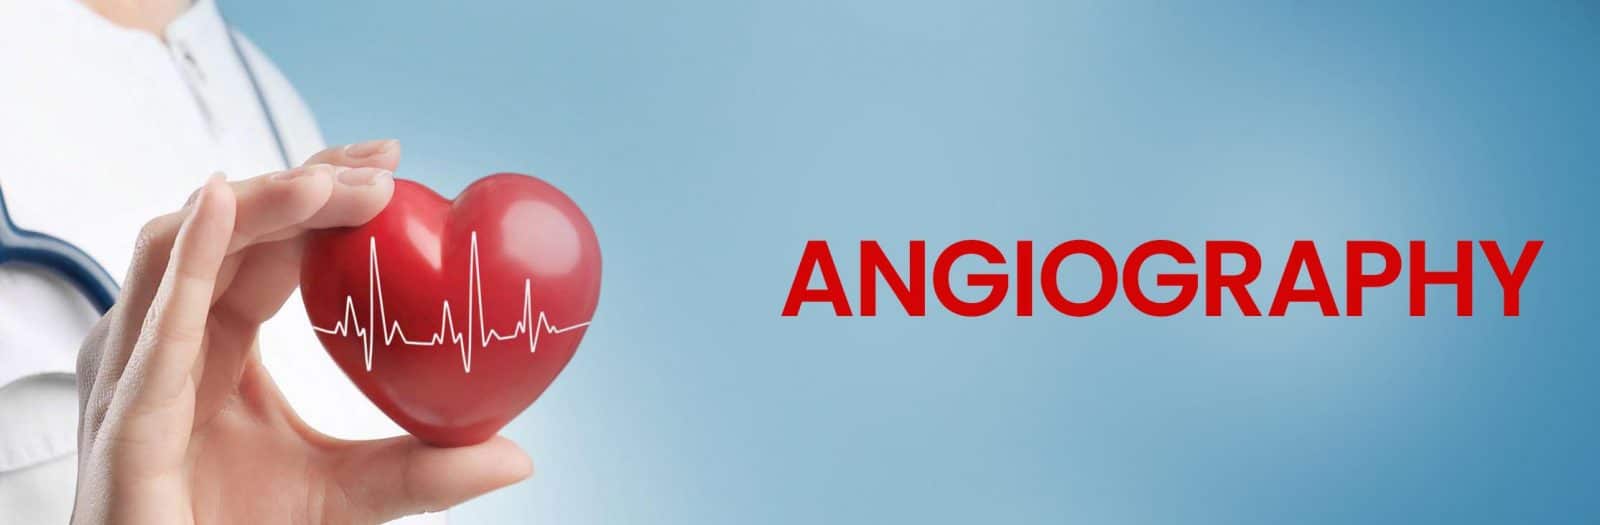 Best Angiography in Indore | Best Cardiologist in MP